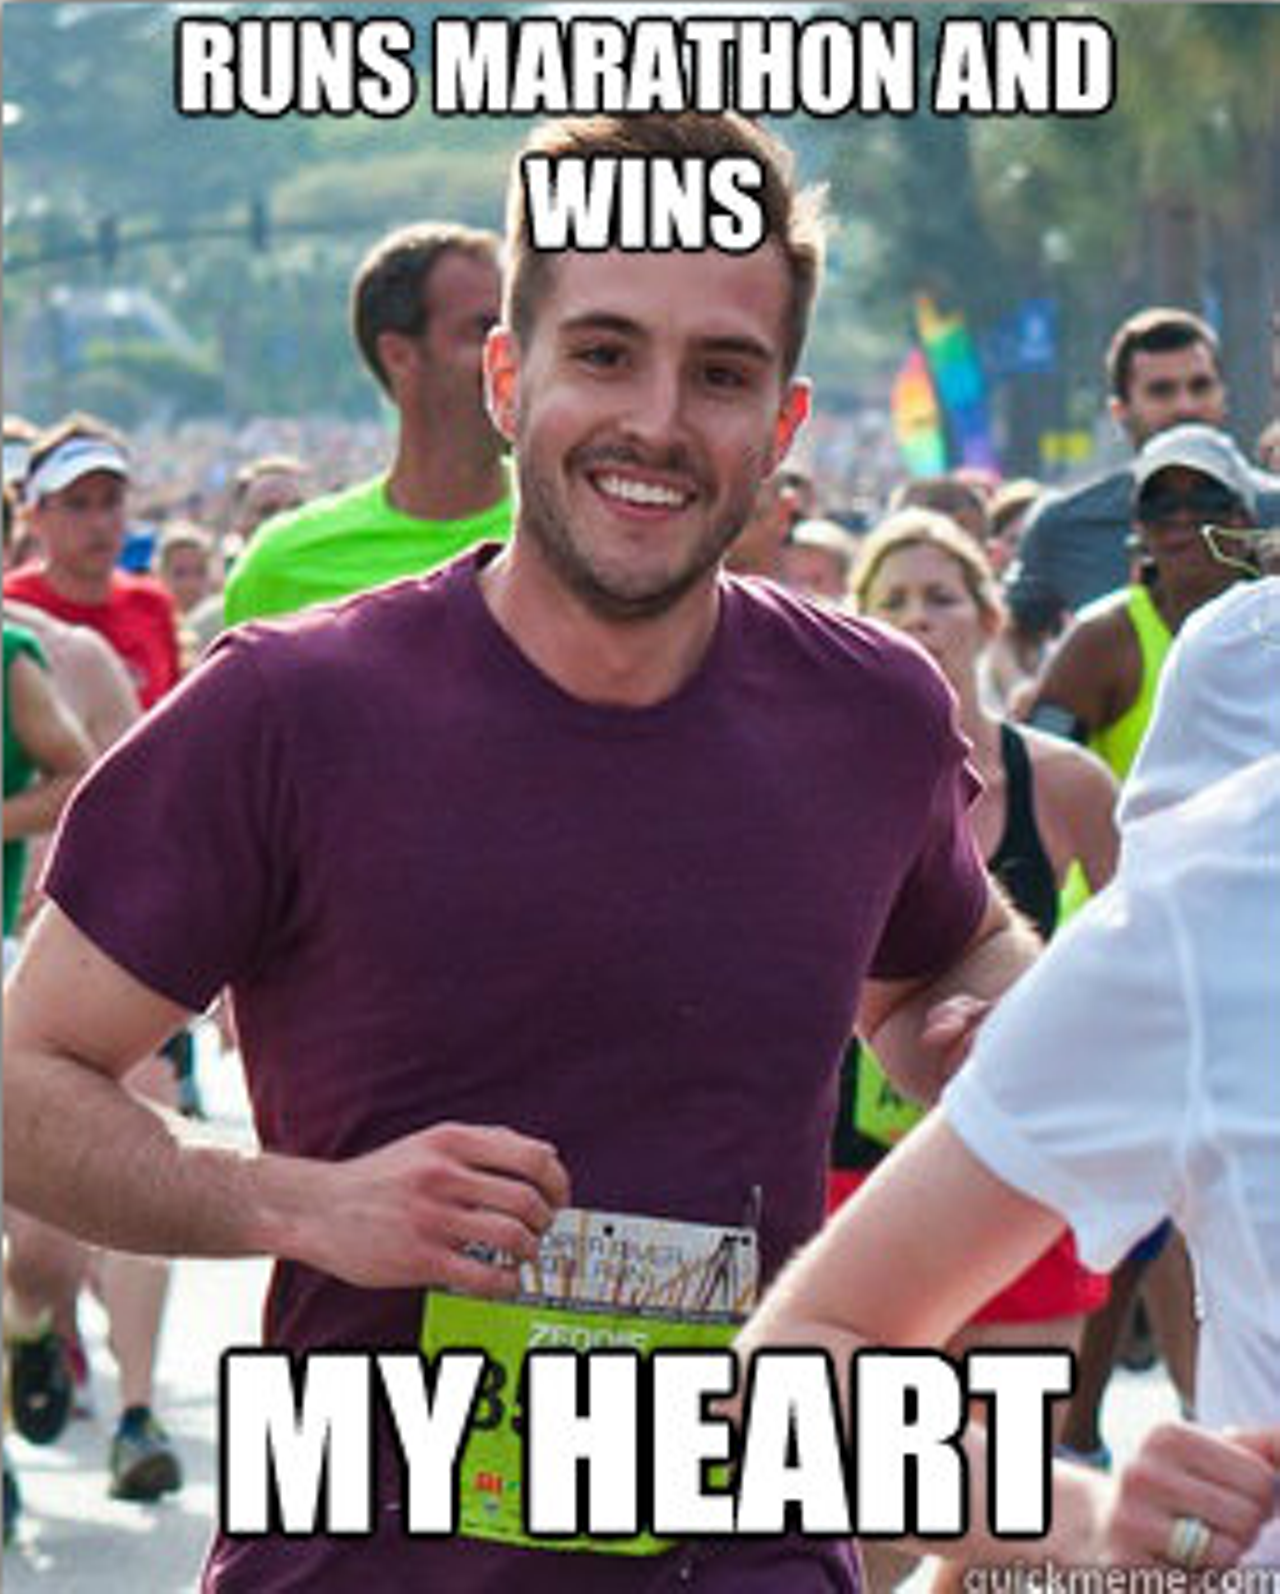 Got questions for the ridiculously photogenic bridge runner ...